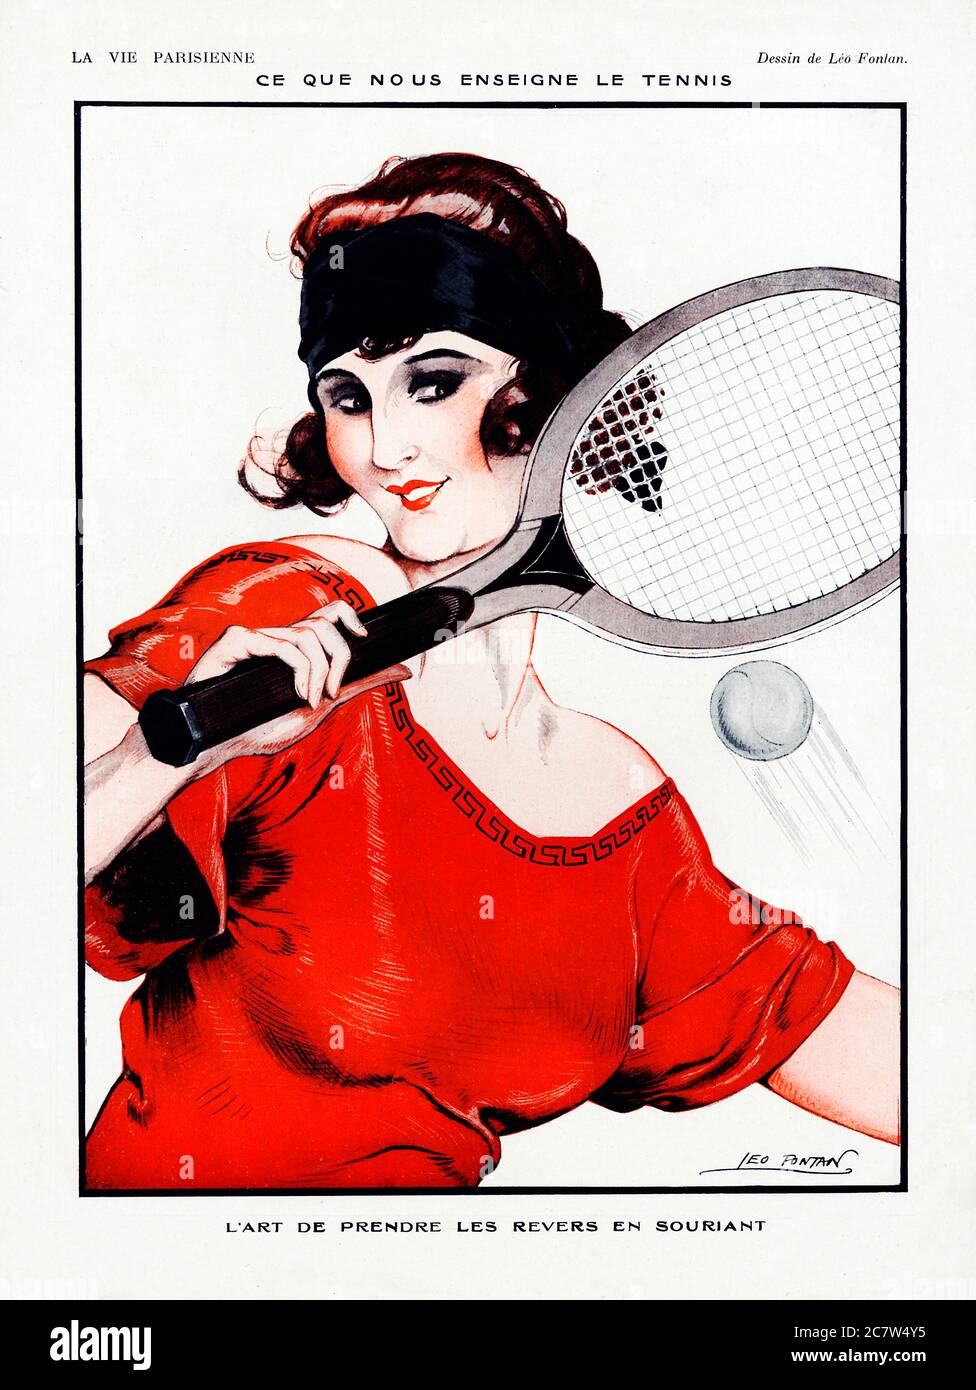 Tennis Lesson, teaching the art of smiling at a backhand, or rather a setback, as shown by a belle of the court Stock Photo